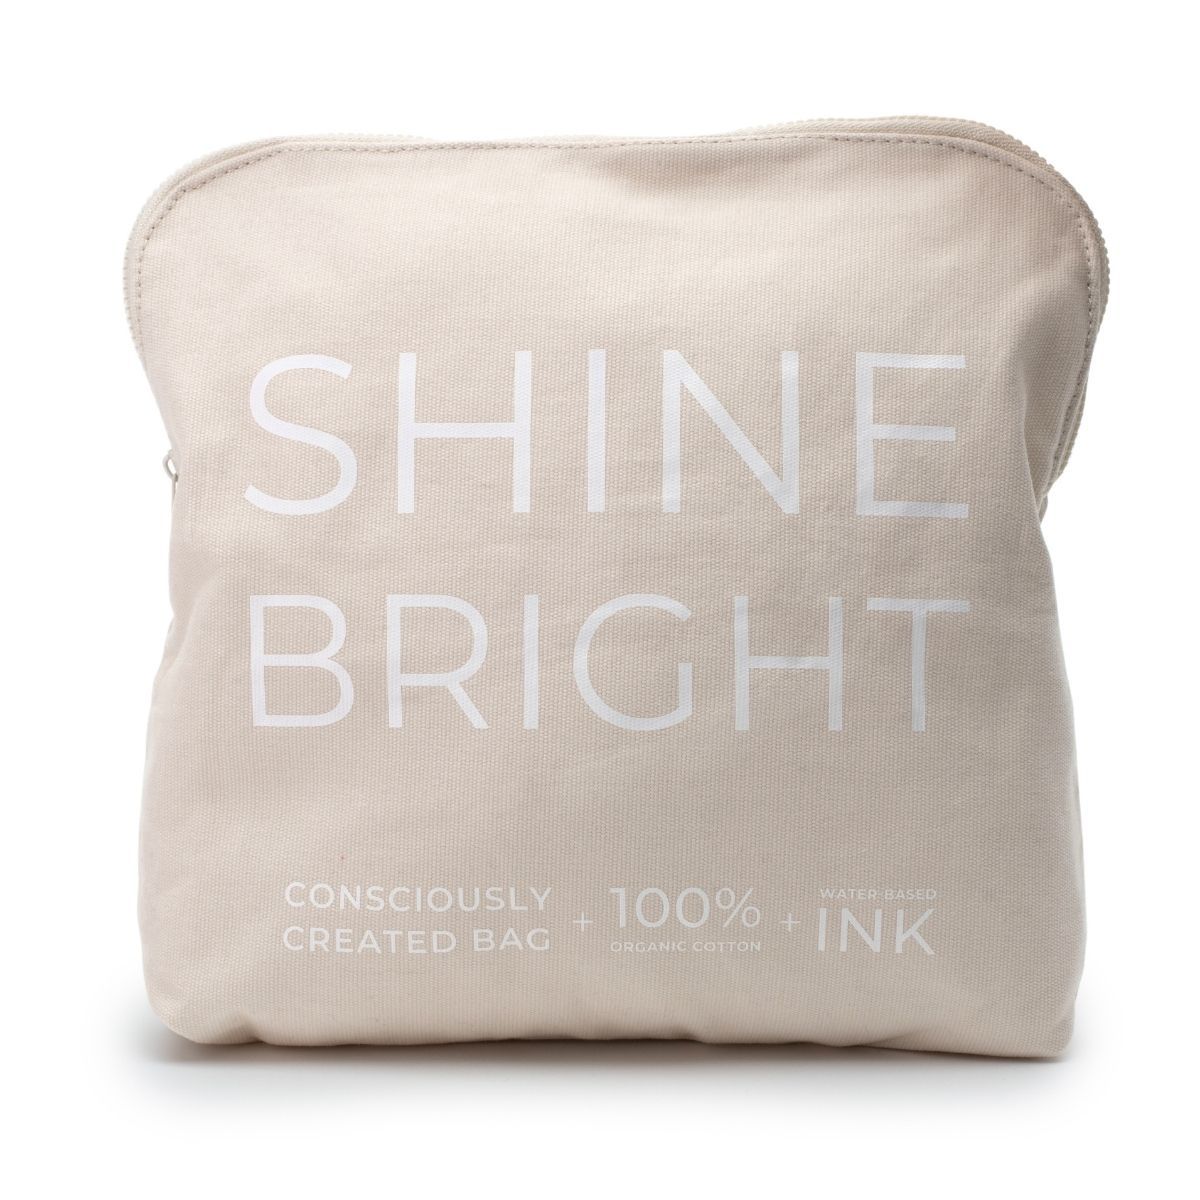 LUSTRE® ClearSkin Shine Bright Pouch